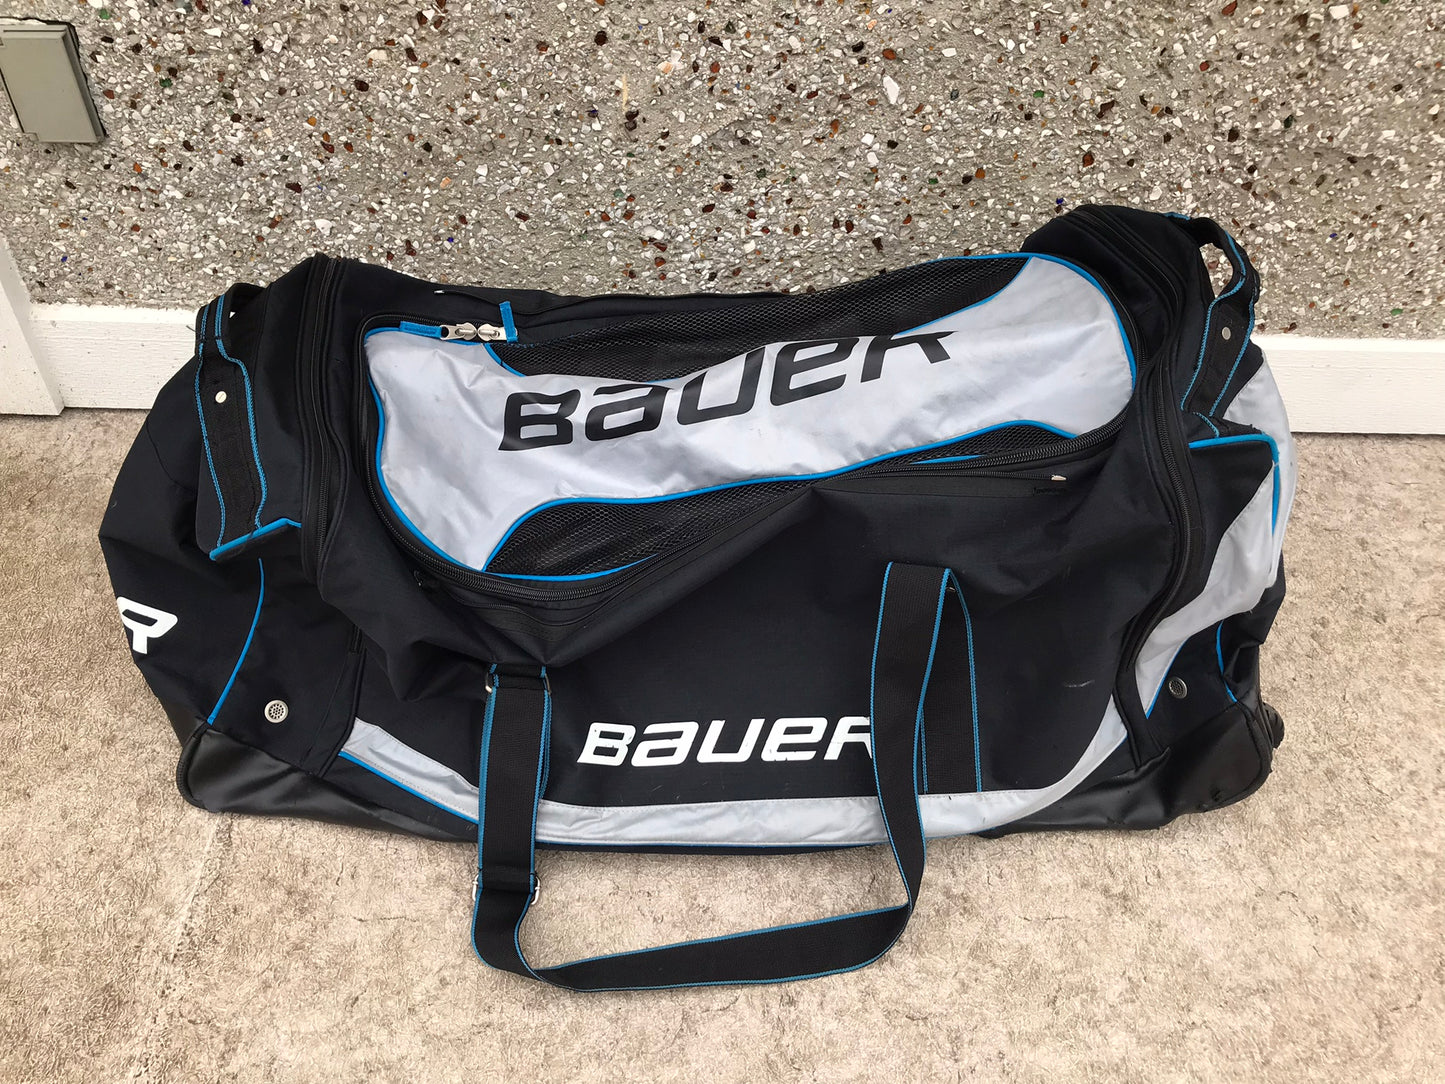 Hockey Bag Men's Size On Wheels Bauer Navy and Black Handle Pops in or out.  All Zippers Perfect.   Minor Wear